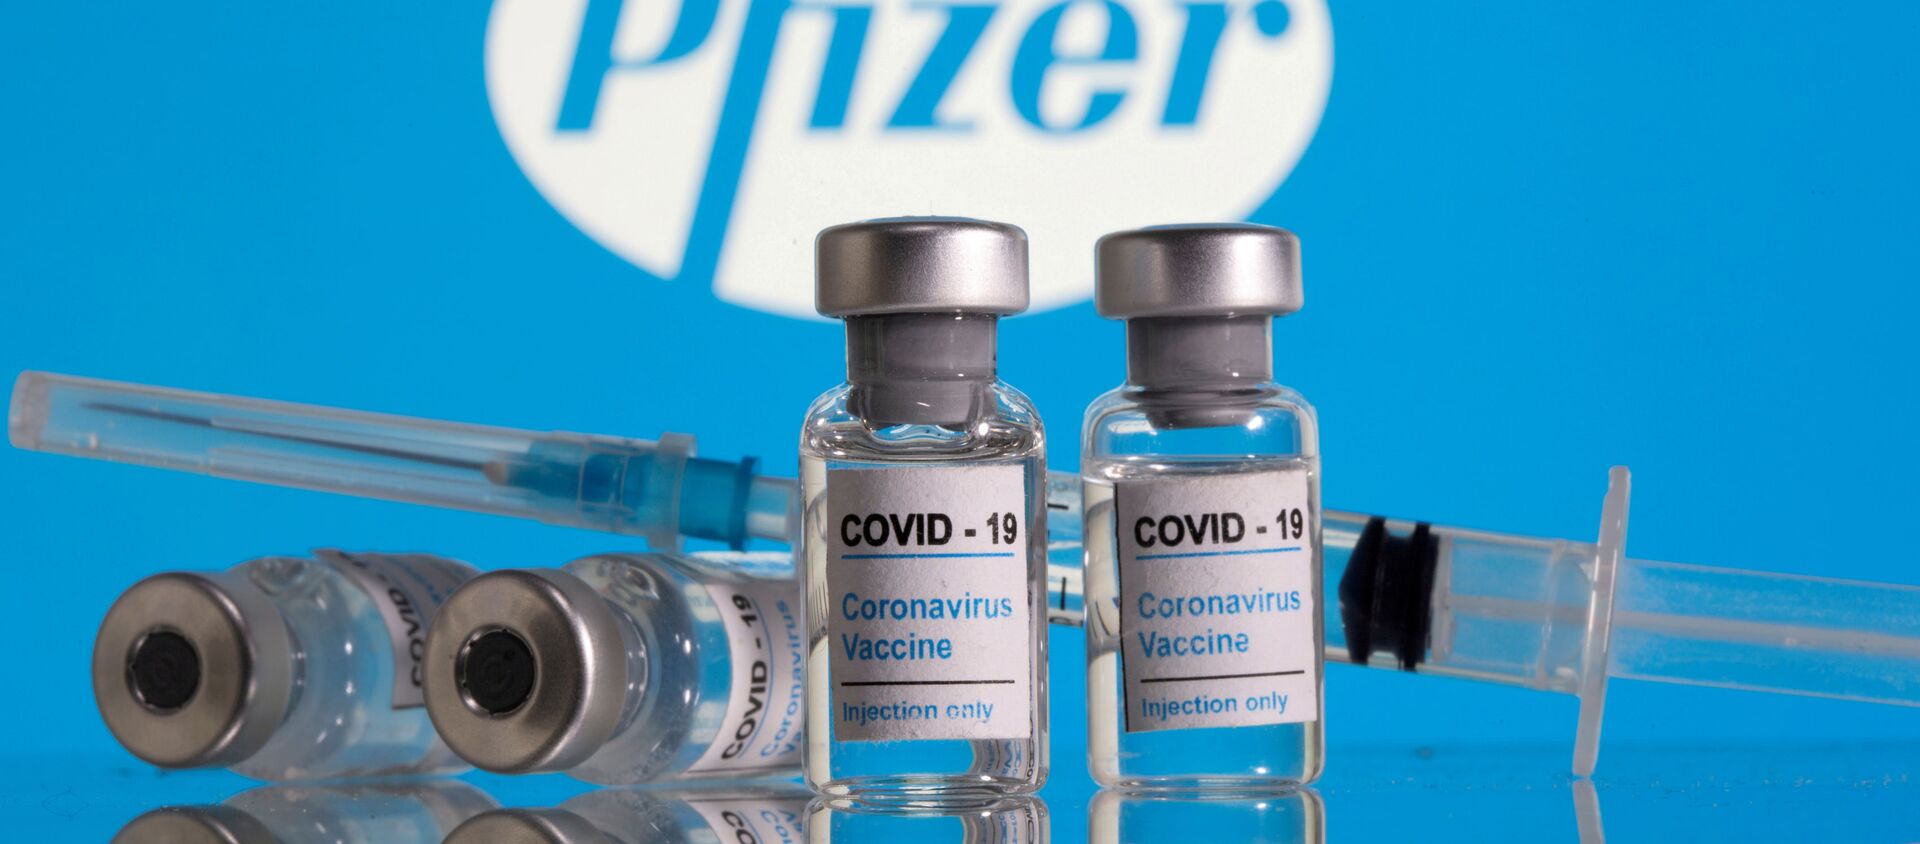 Vials labelled COVID-19 Coronavirus Vaccine and a syringe are seen in front of the Pfizer logo in this illustration taken February 9, 2021 - Sputnik International, 1920